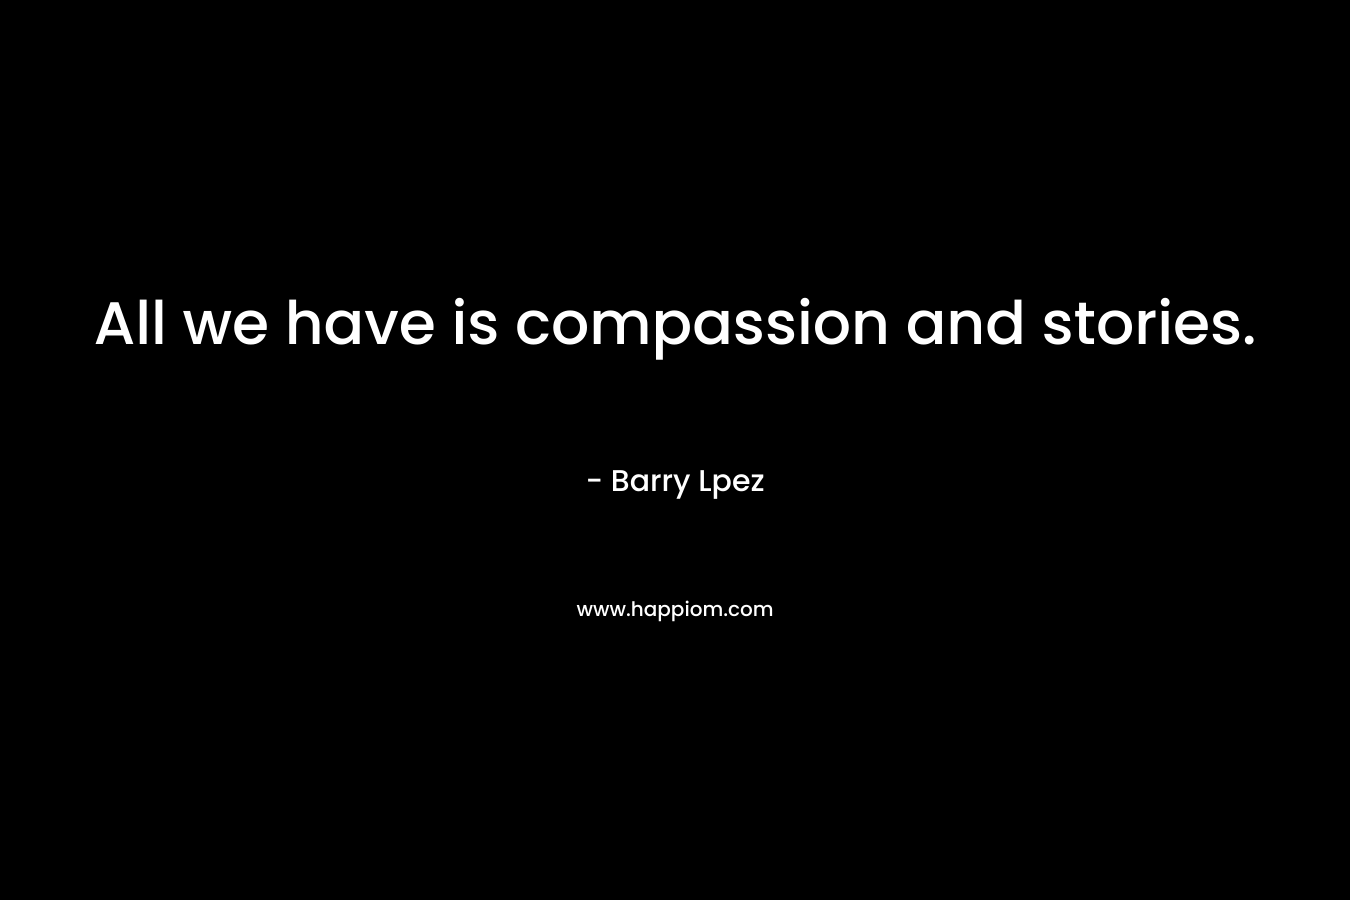 All we have is compassion and stories.